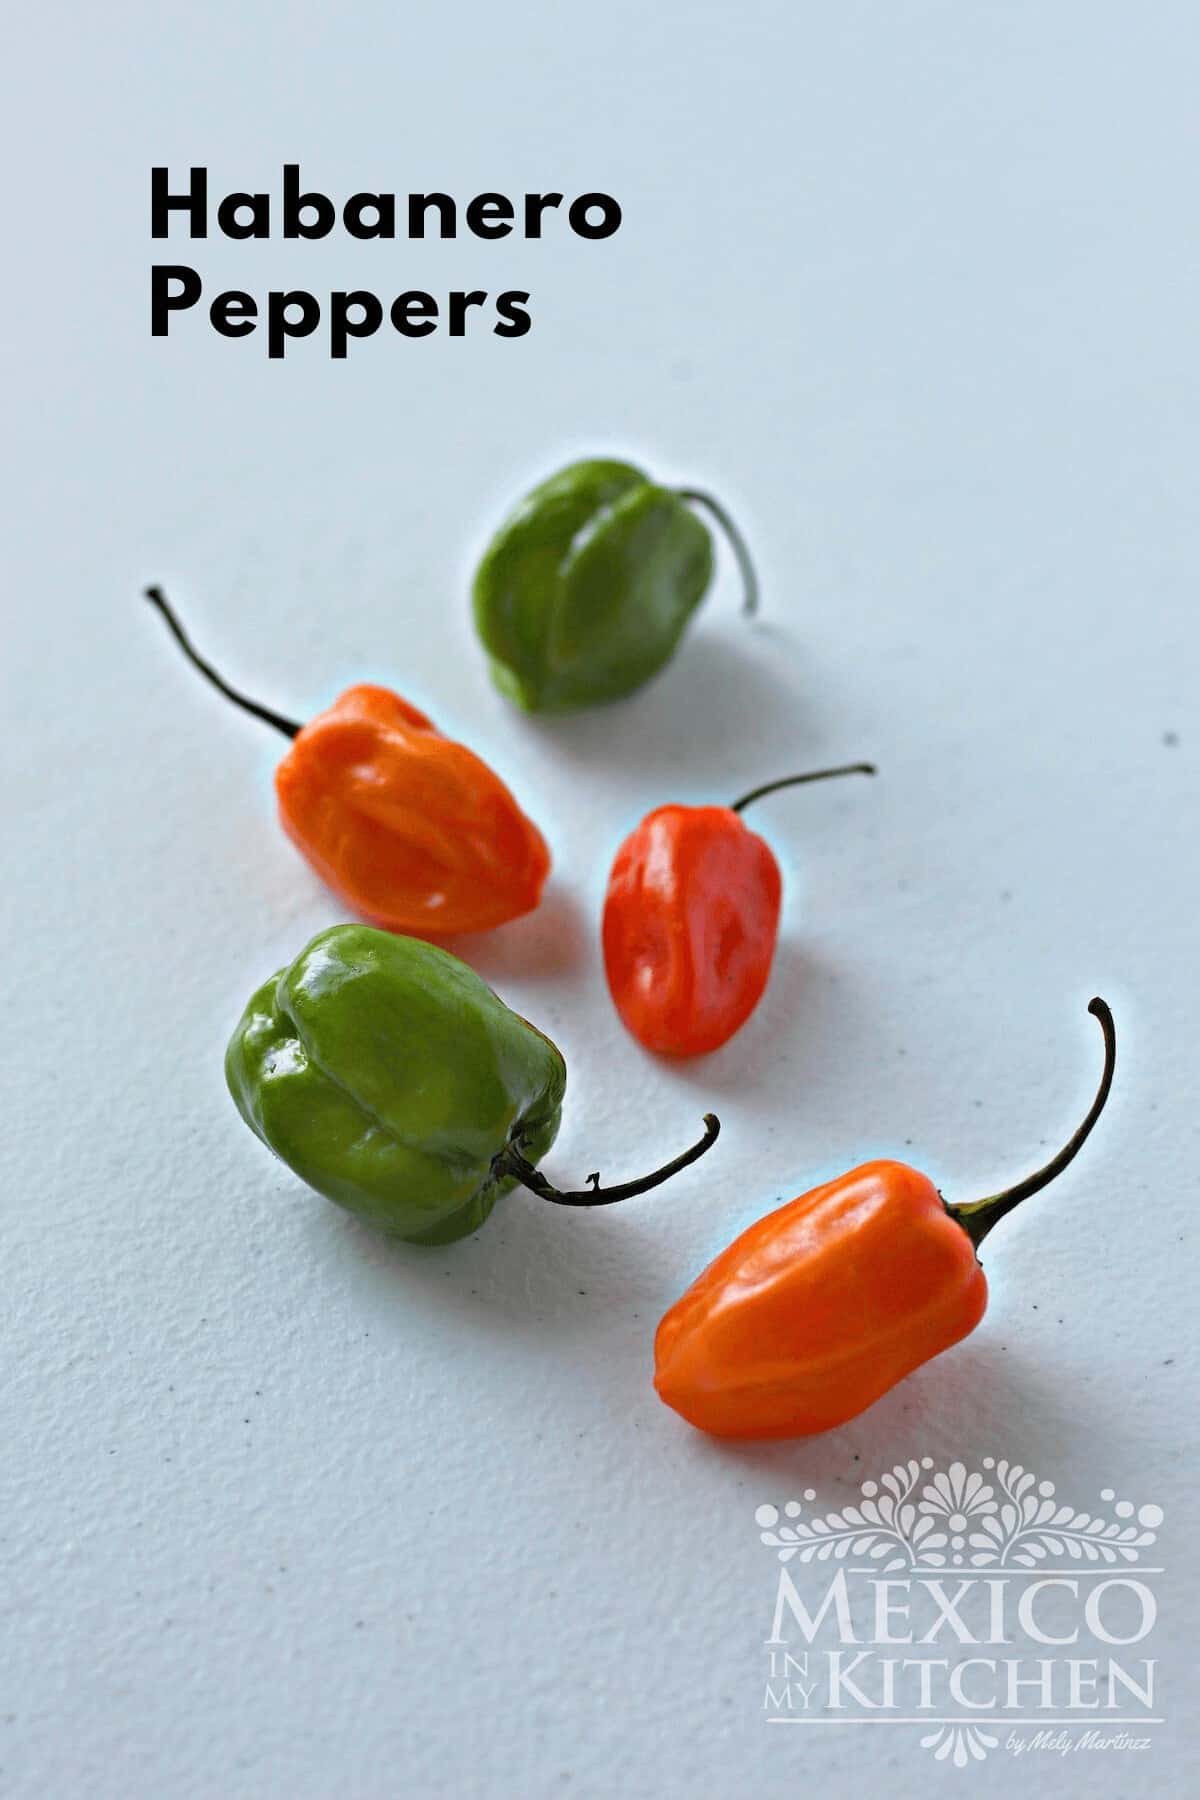 Green and riped Habanero peppers